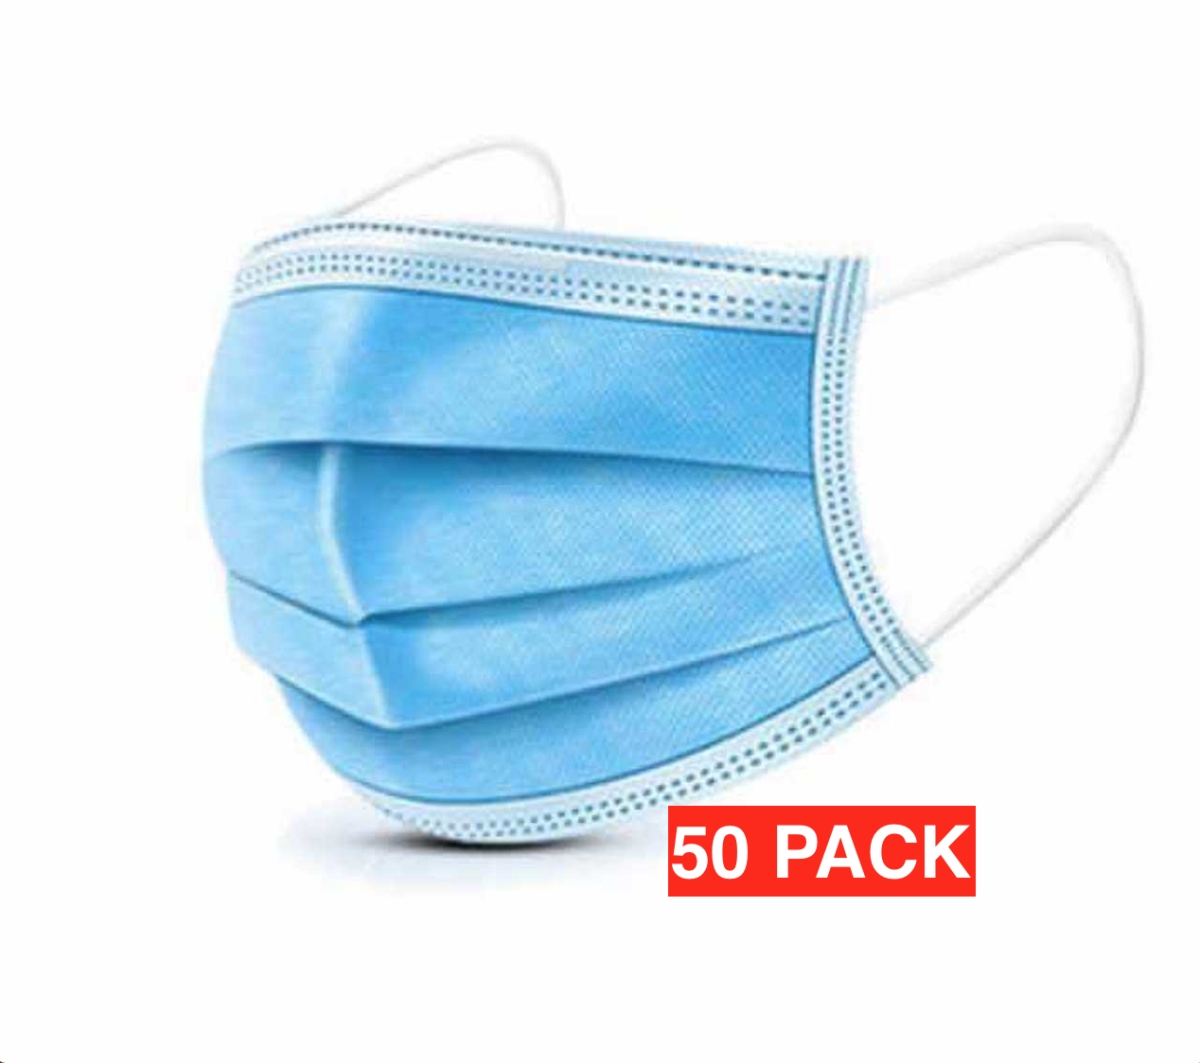 Picture of Gopremium BLUEMASK50PACK-3 PLY - COD627 Face Cover Mask with Earloops - 50 Count